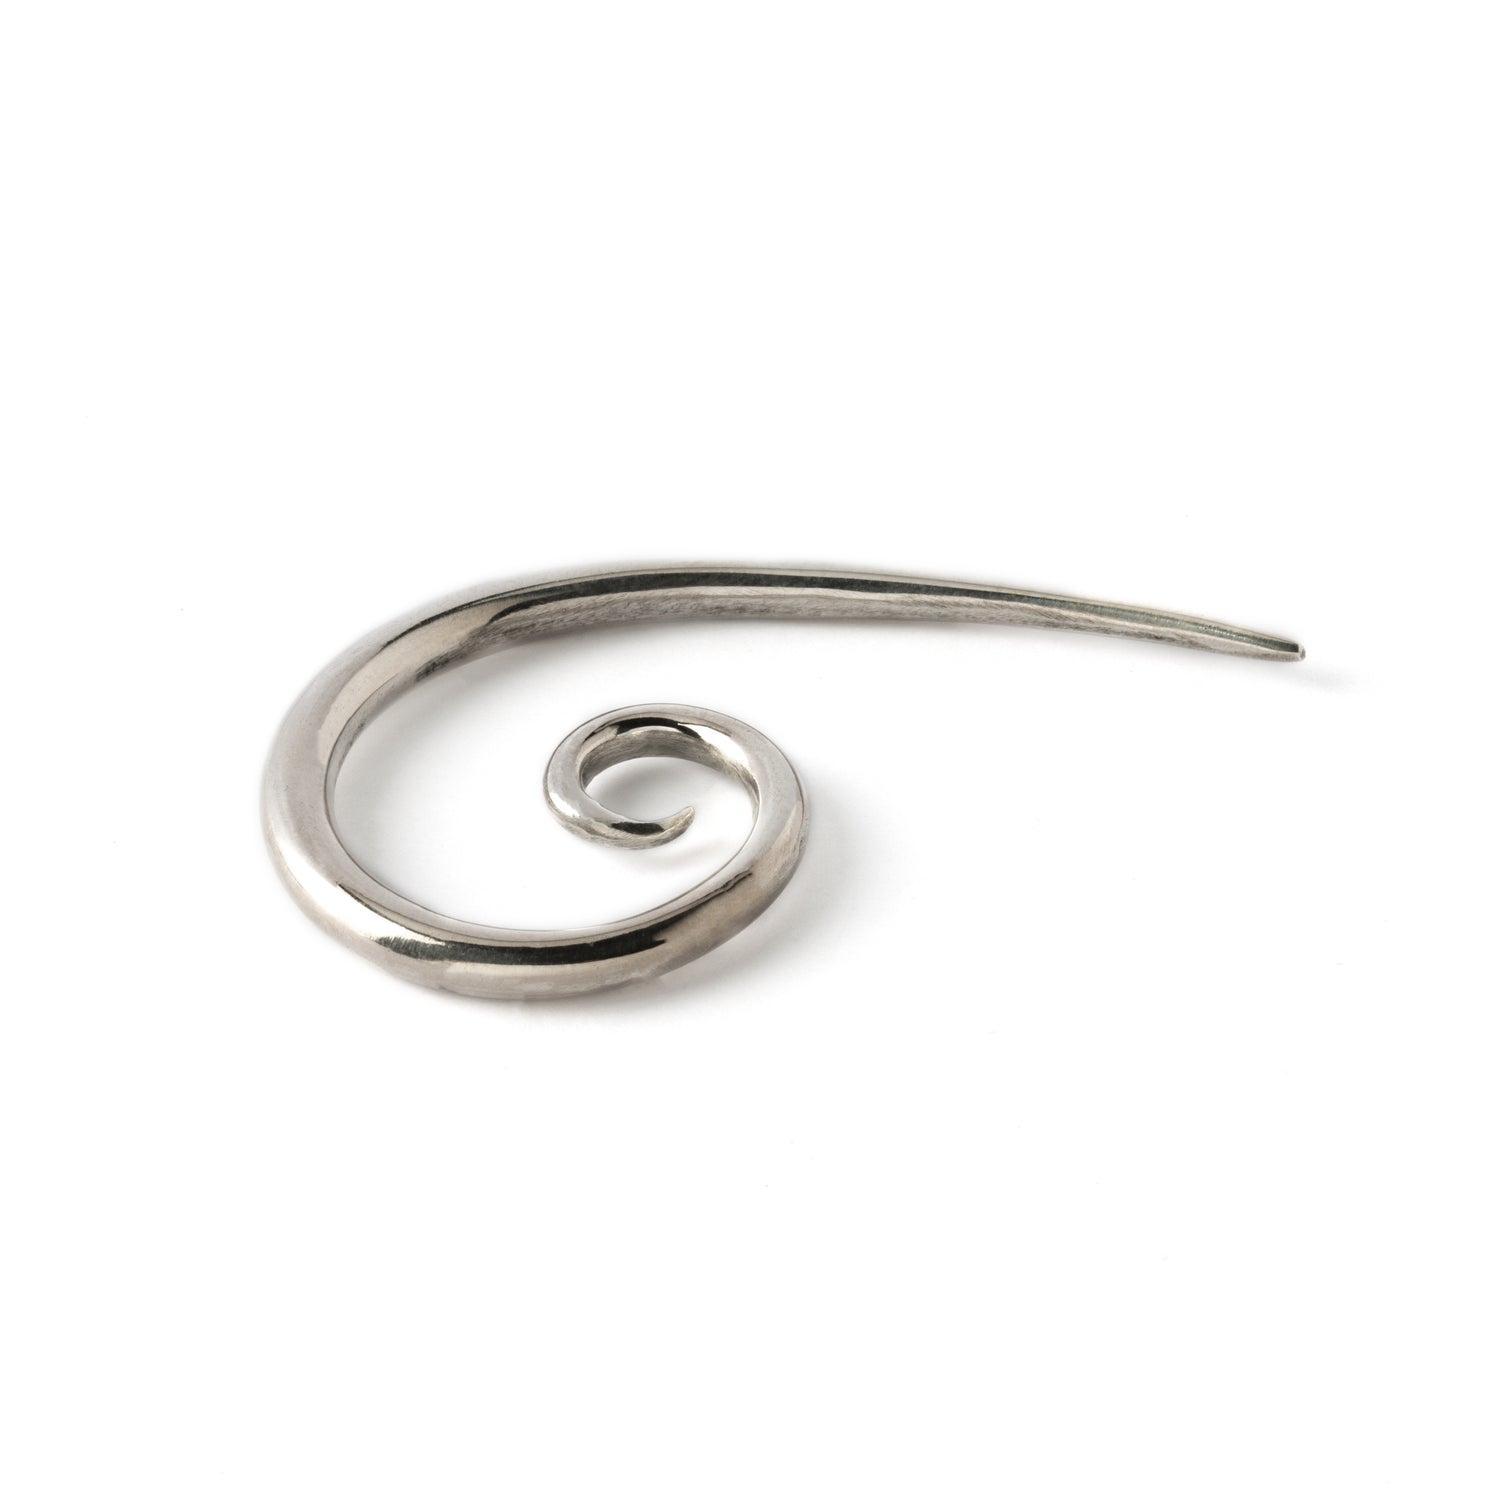 silver spiral long hook ear stretcher front close up view